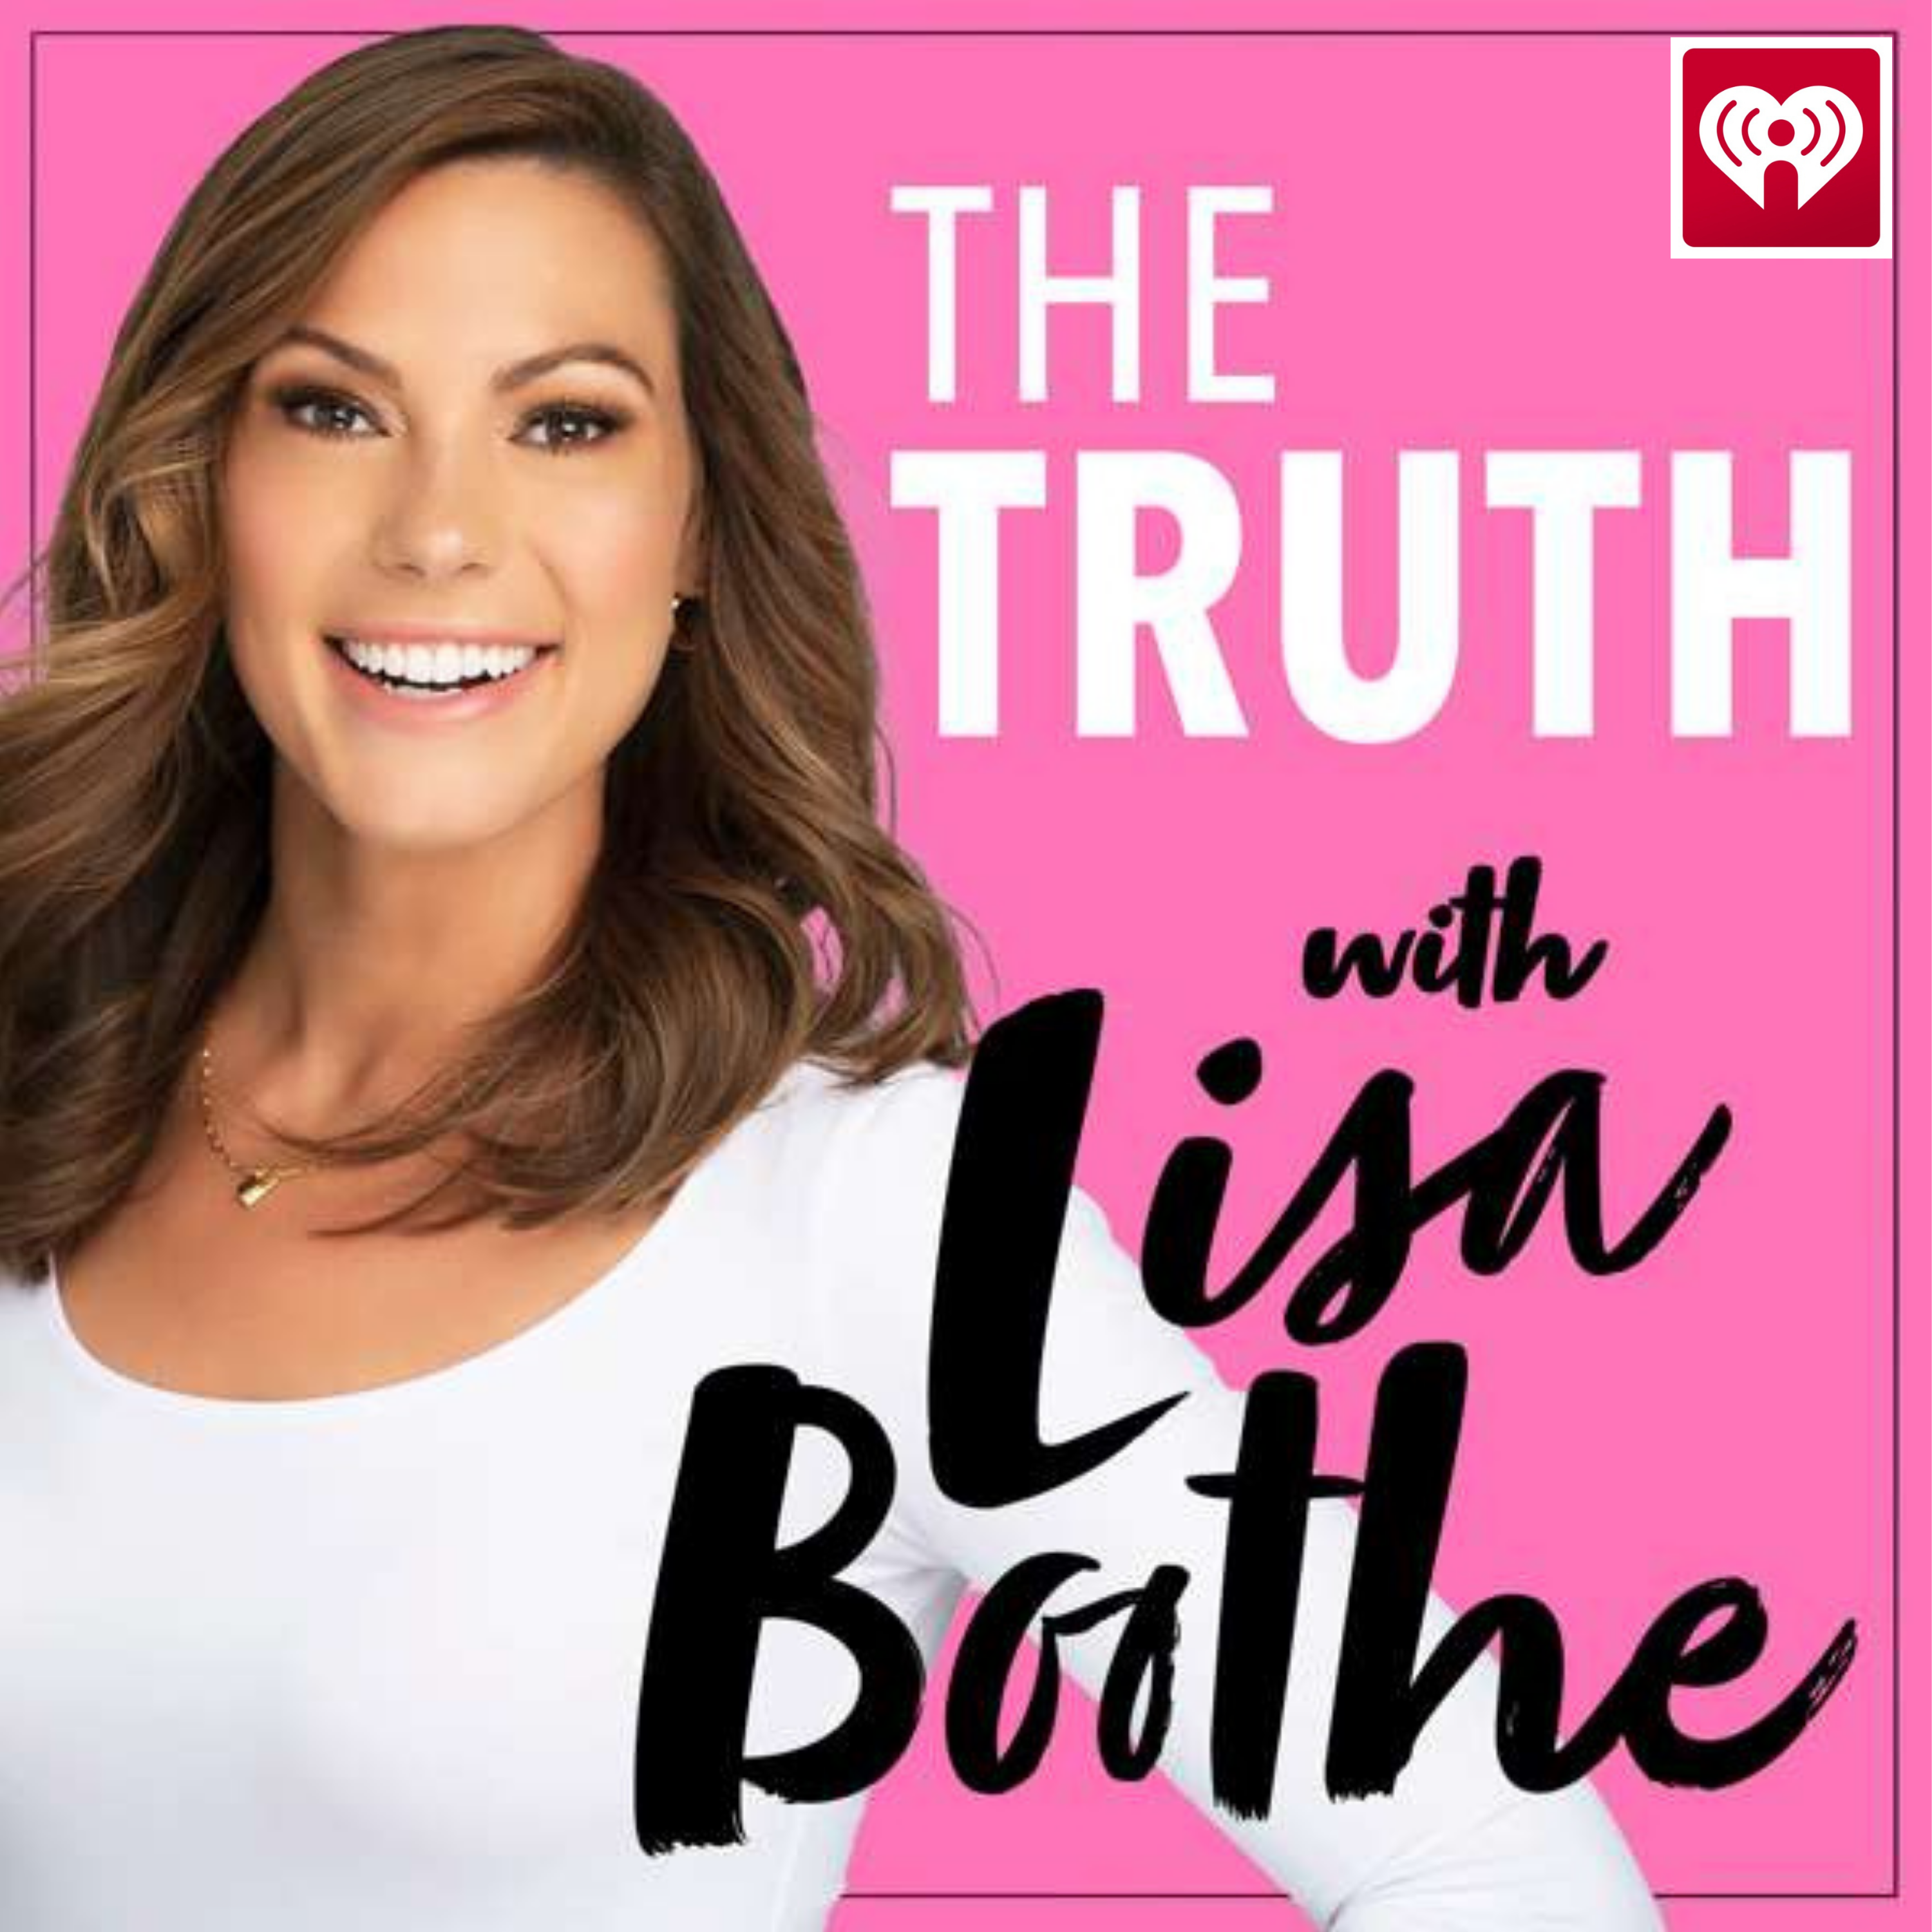 The Truth with Lisa Boothe: CENSORSHIP with Rep. Jim Jordan